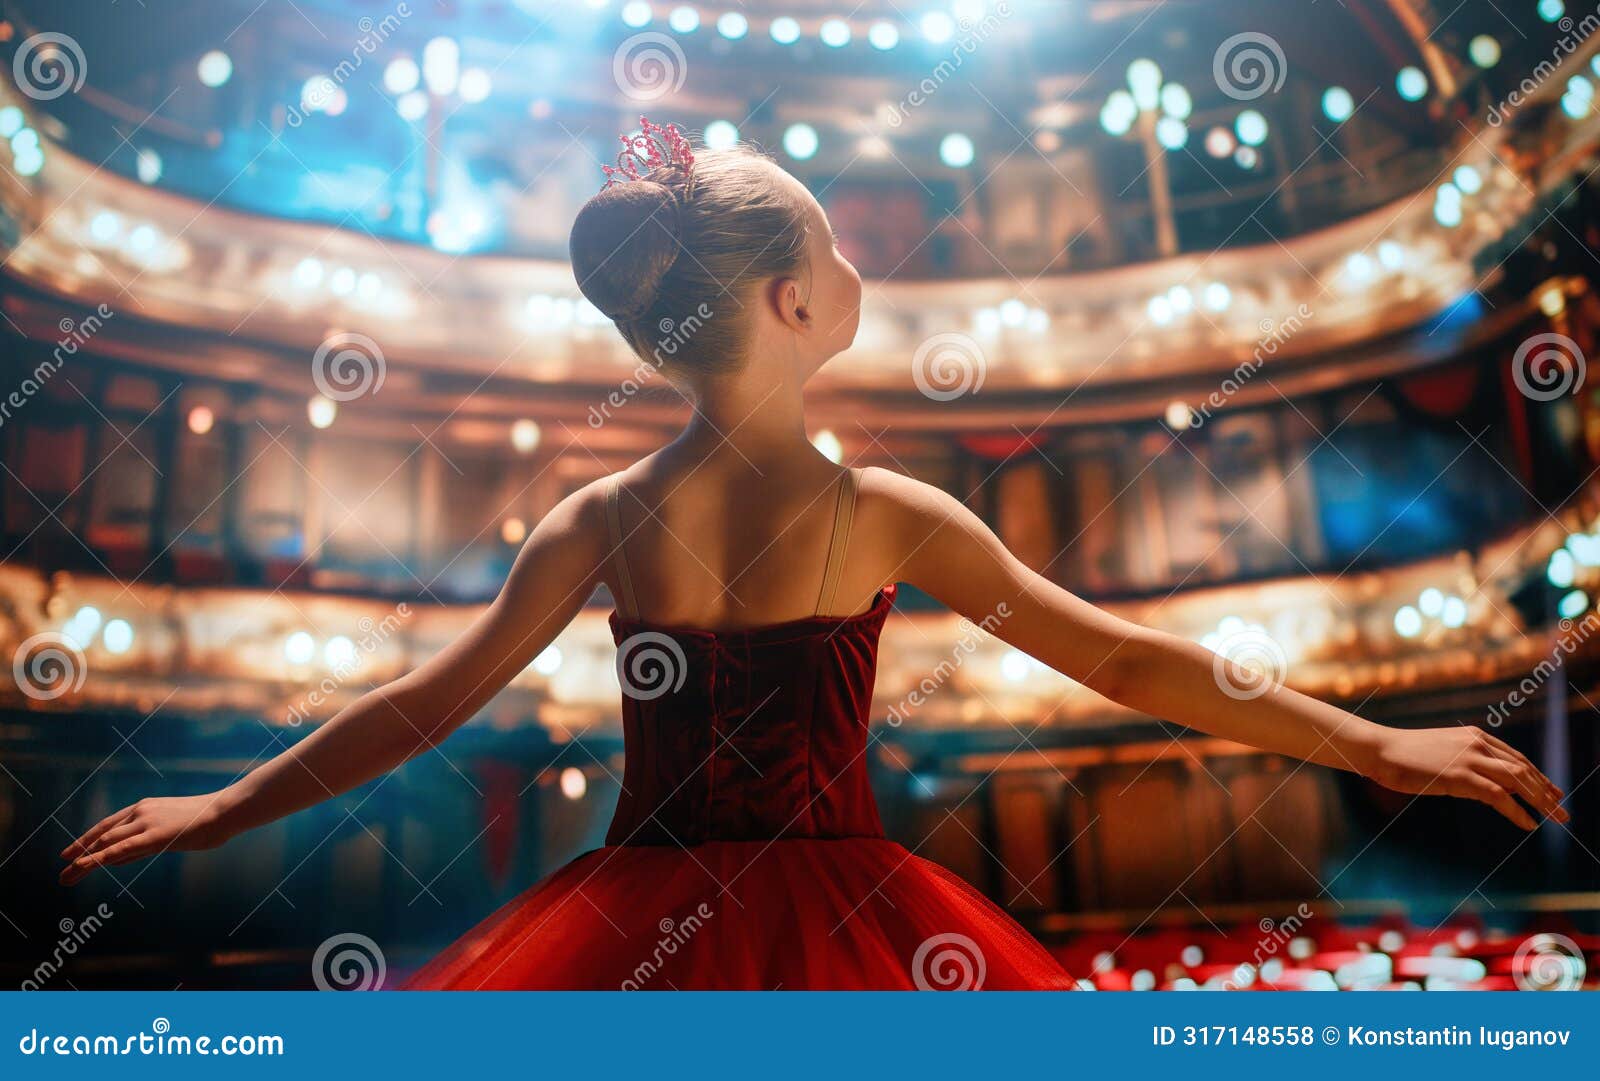 girl in a red tutu dancing on the stage